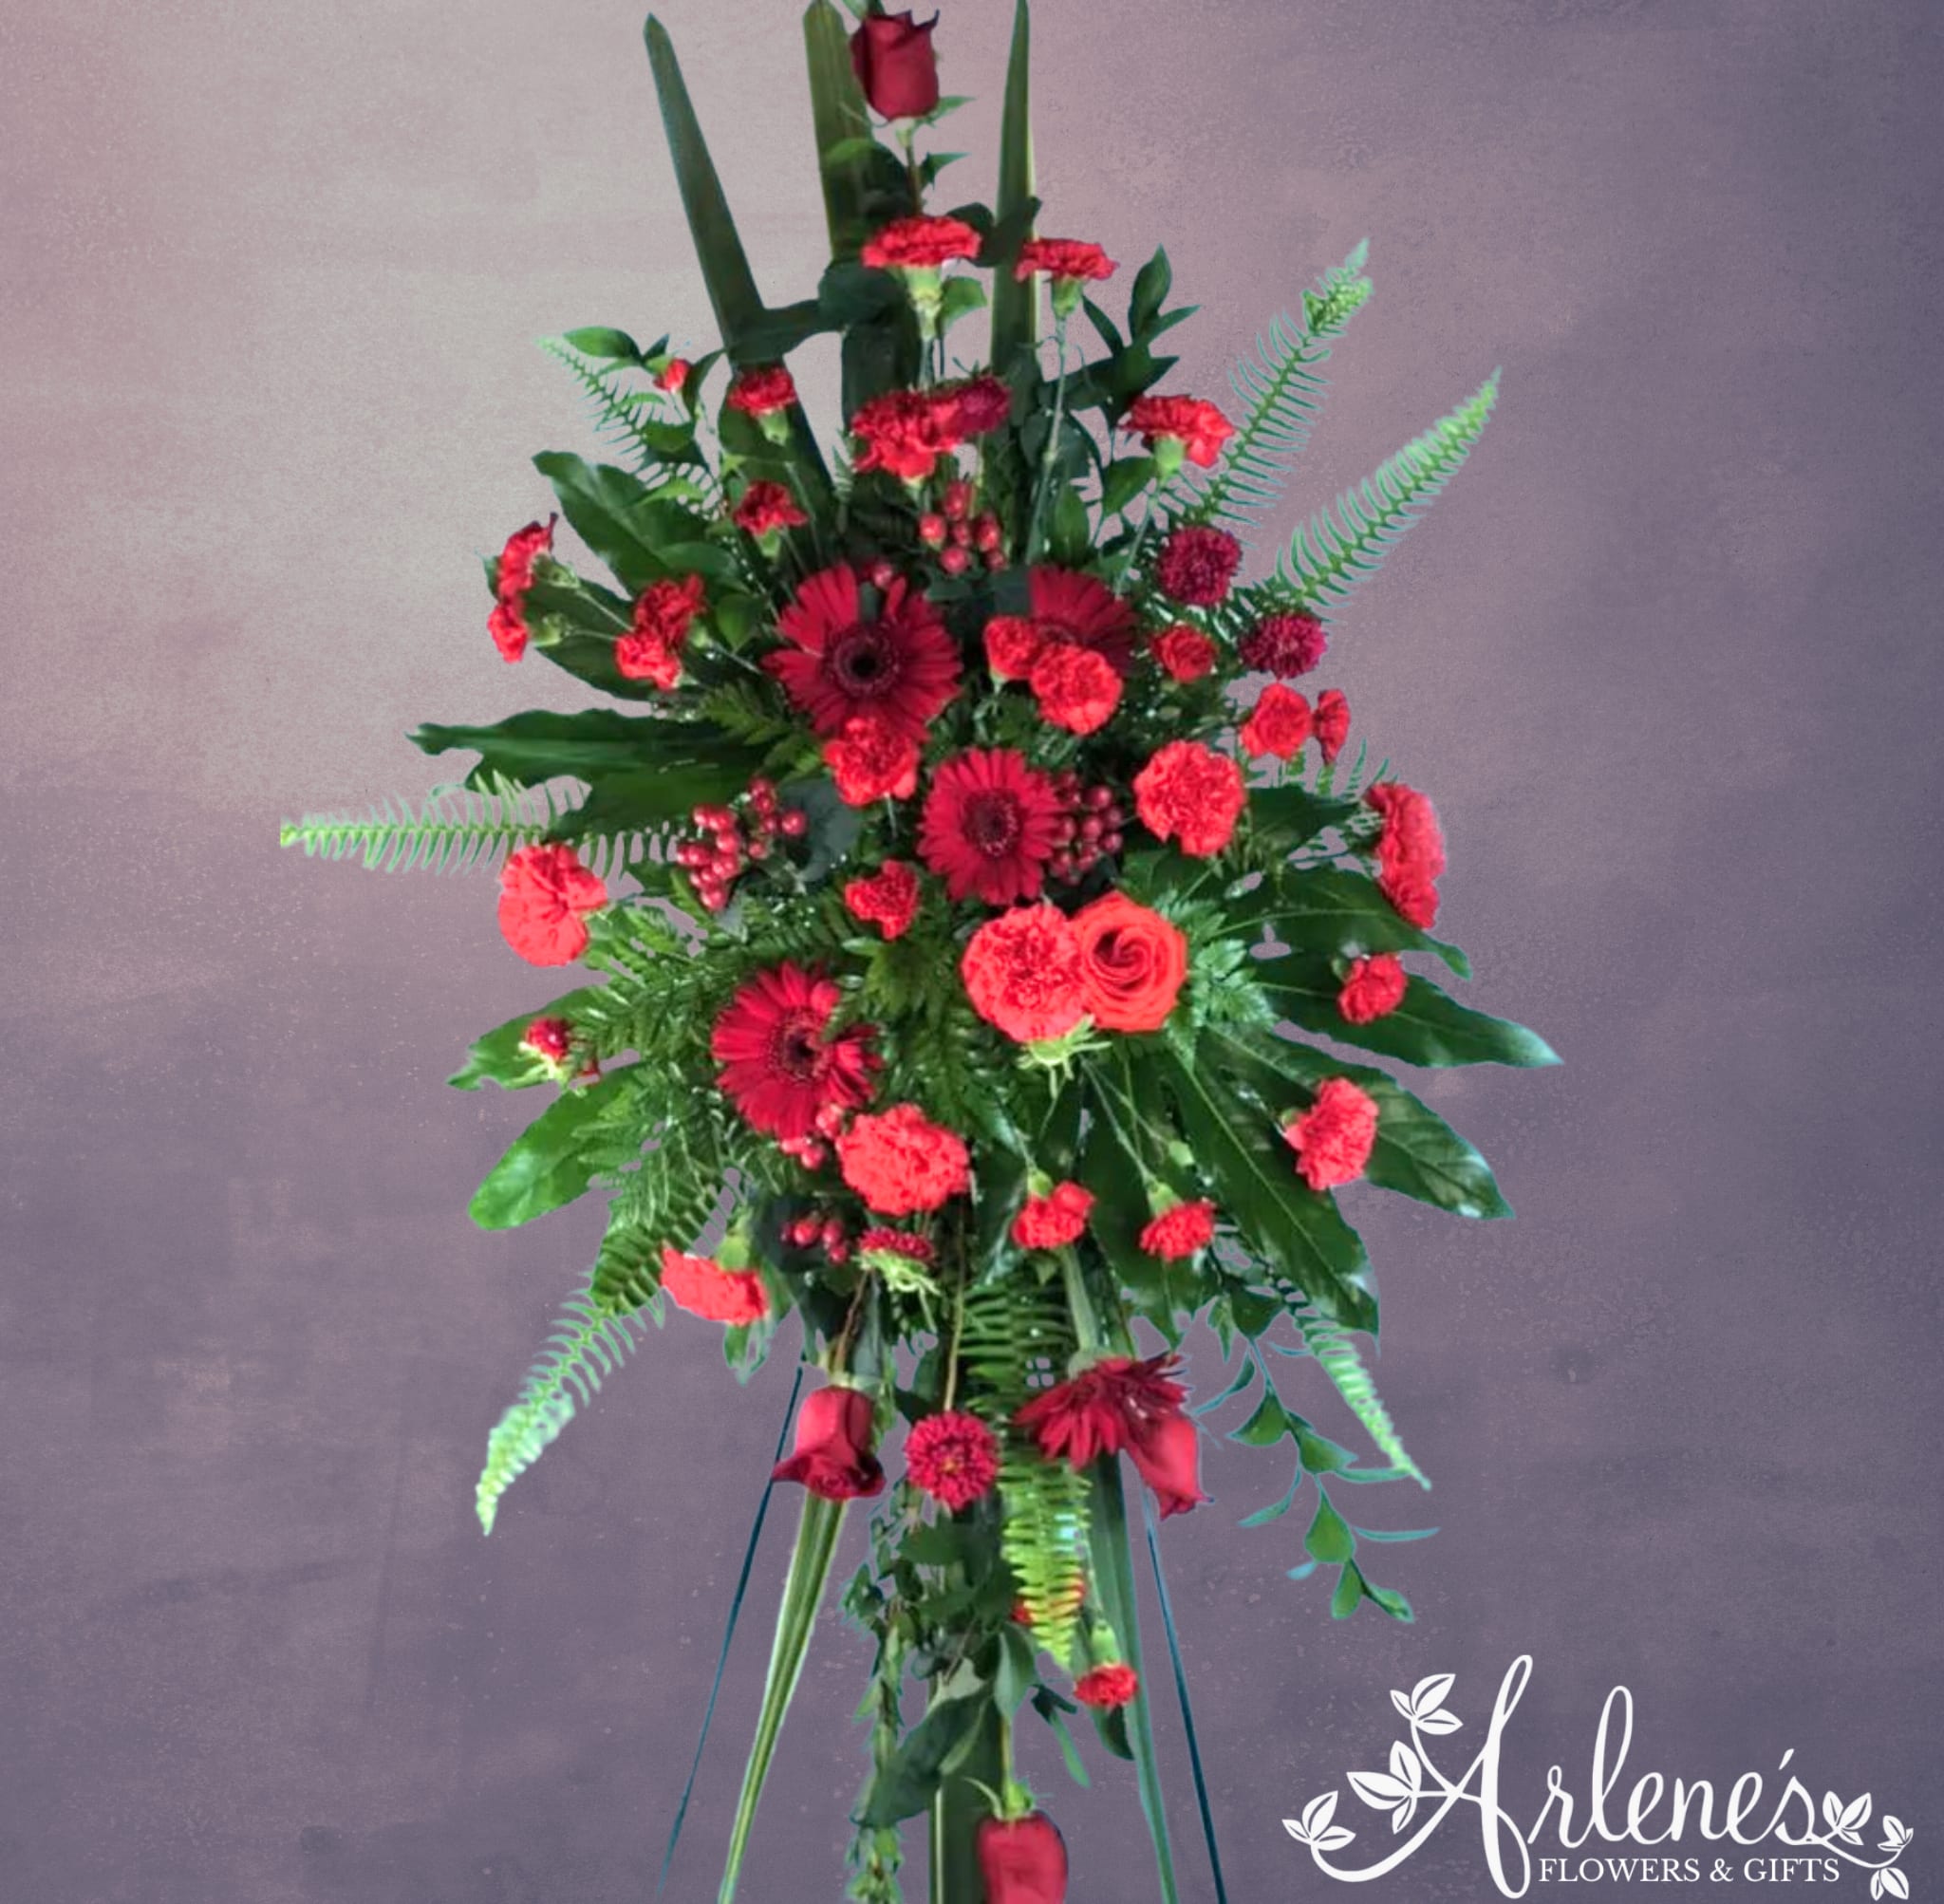 Red Spirit - Strong, vital and deeply moving, this all red sympathy spray stands to honor the loss of a loved one. It features upgraded and unusual greenery and a mix of red flowers (carnations, gerbera daisies and red roses).